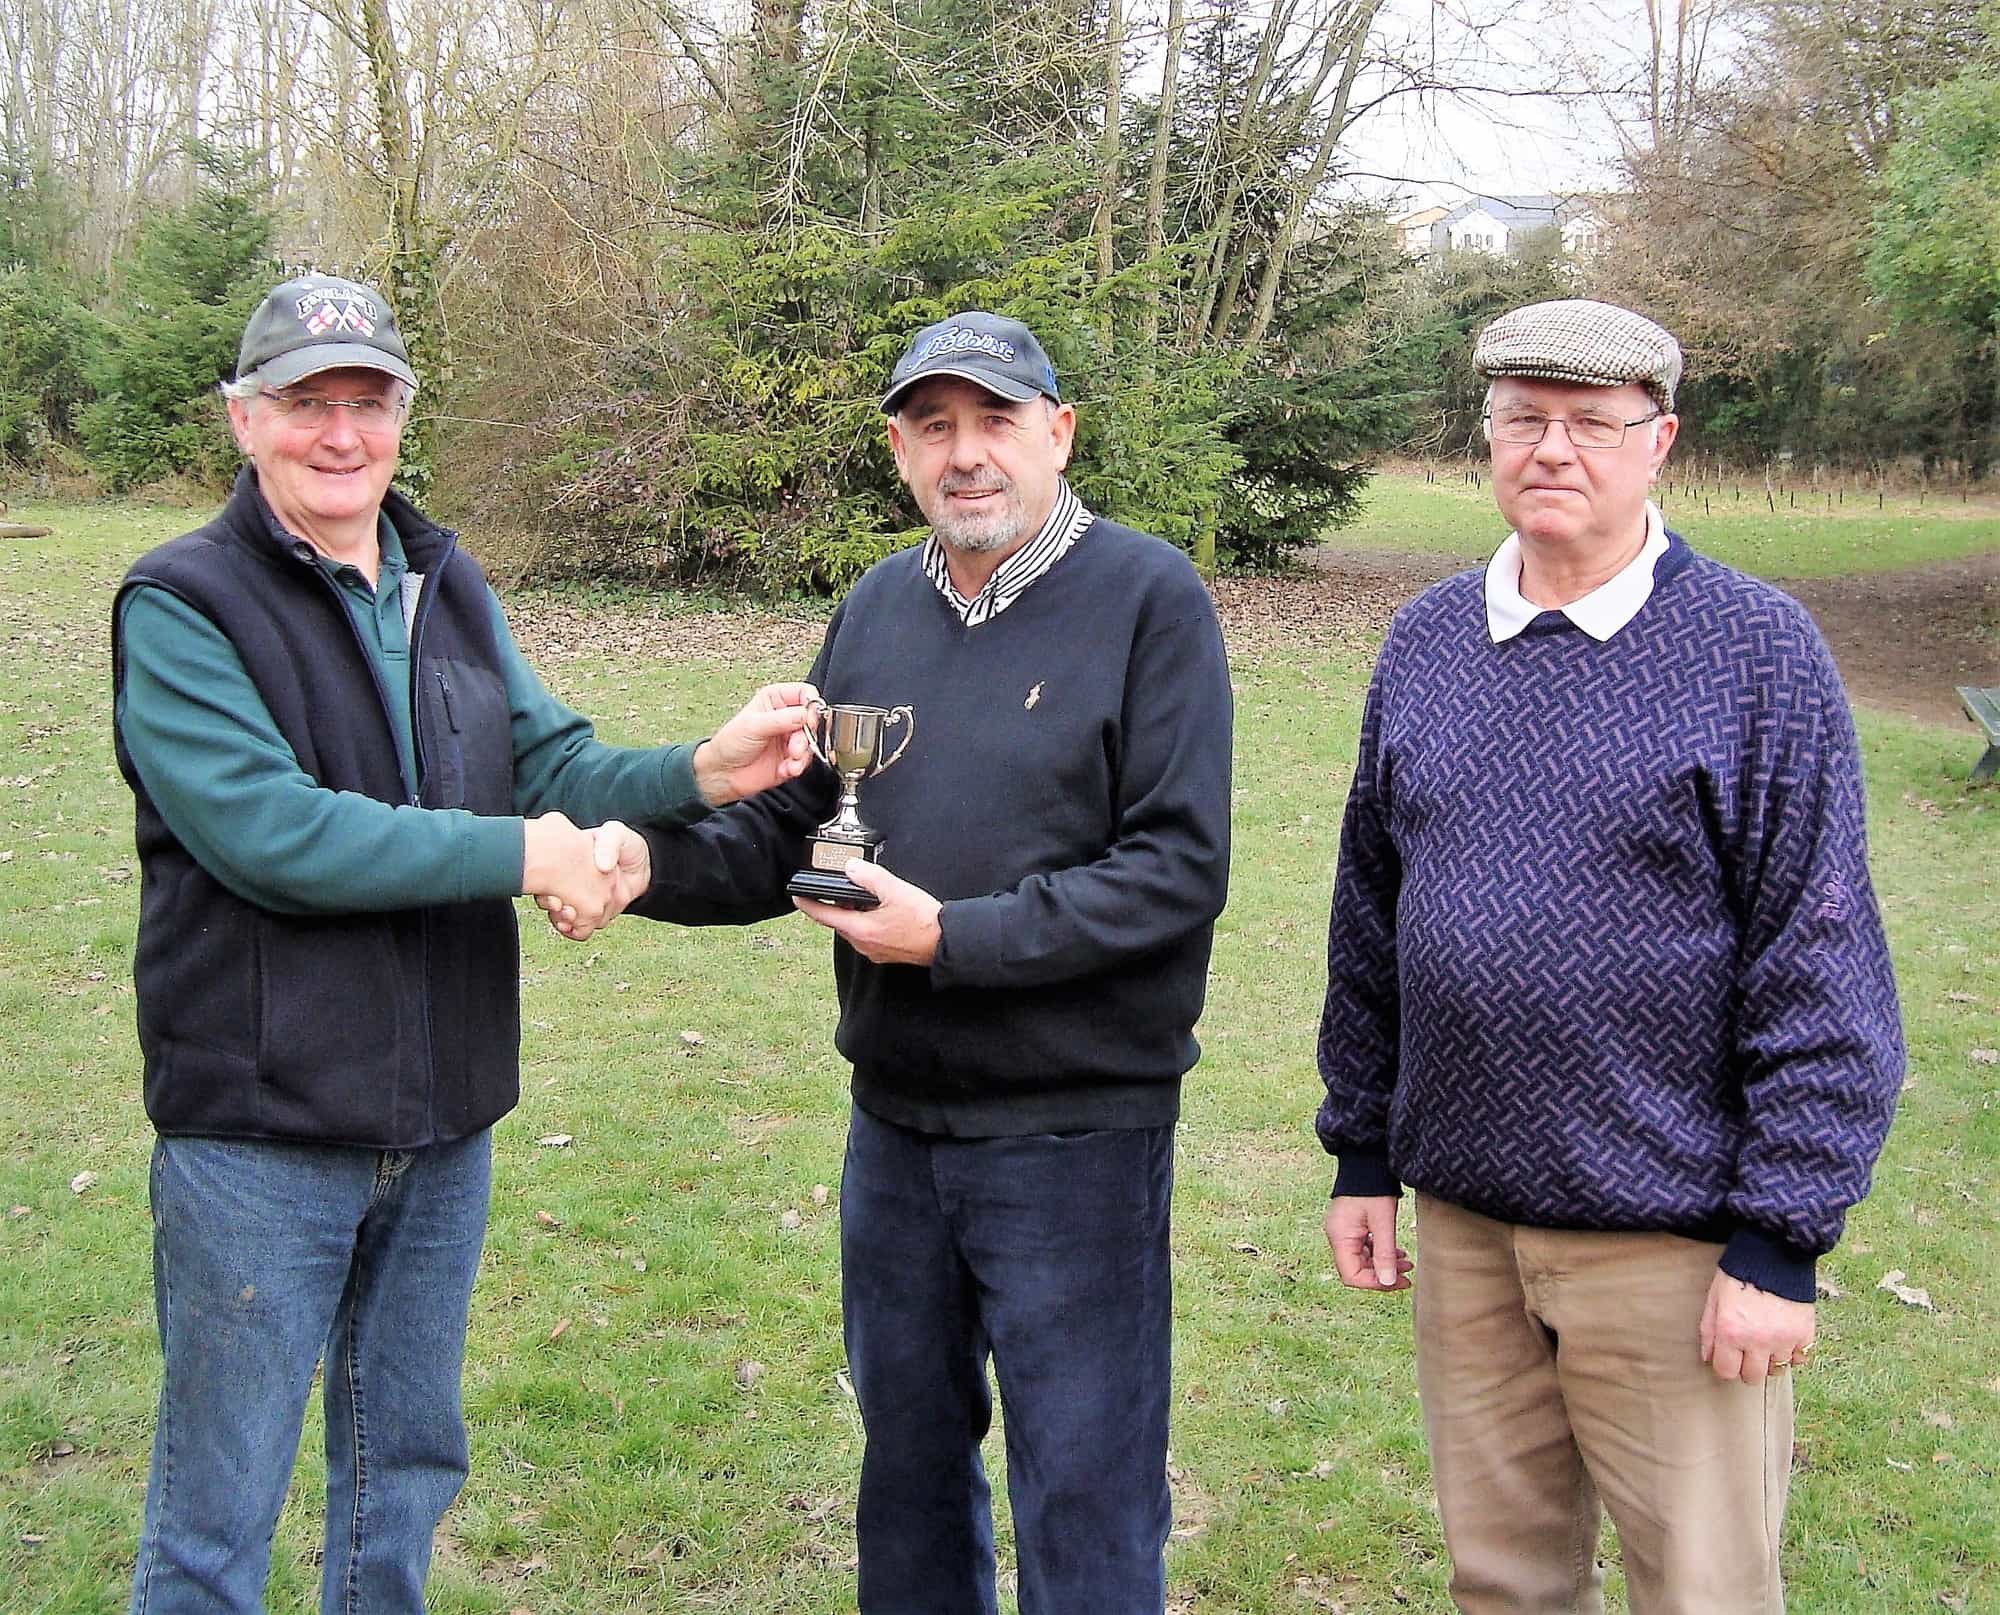 Last year’s winner, Peter Barclay (left), presents Richard Poyser (centre)with the cup in the presence of the sponsor Brian White (right).